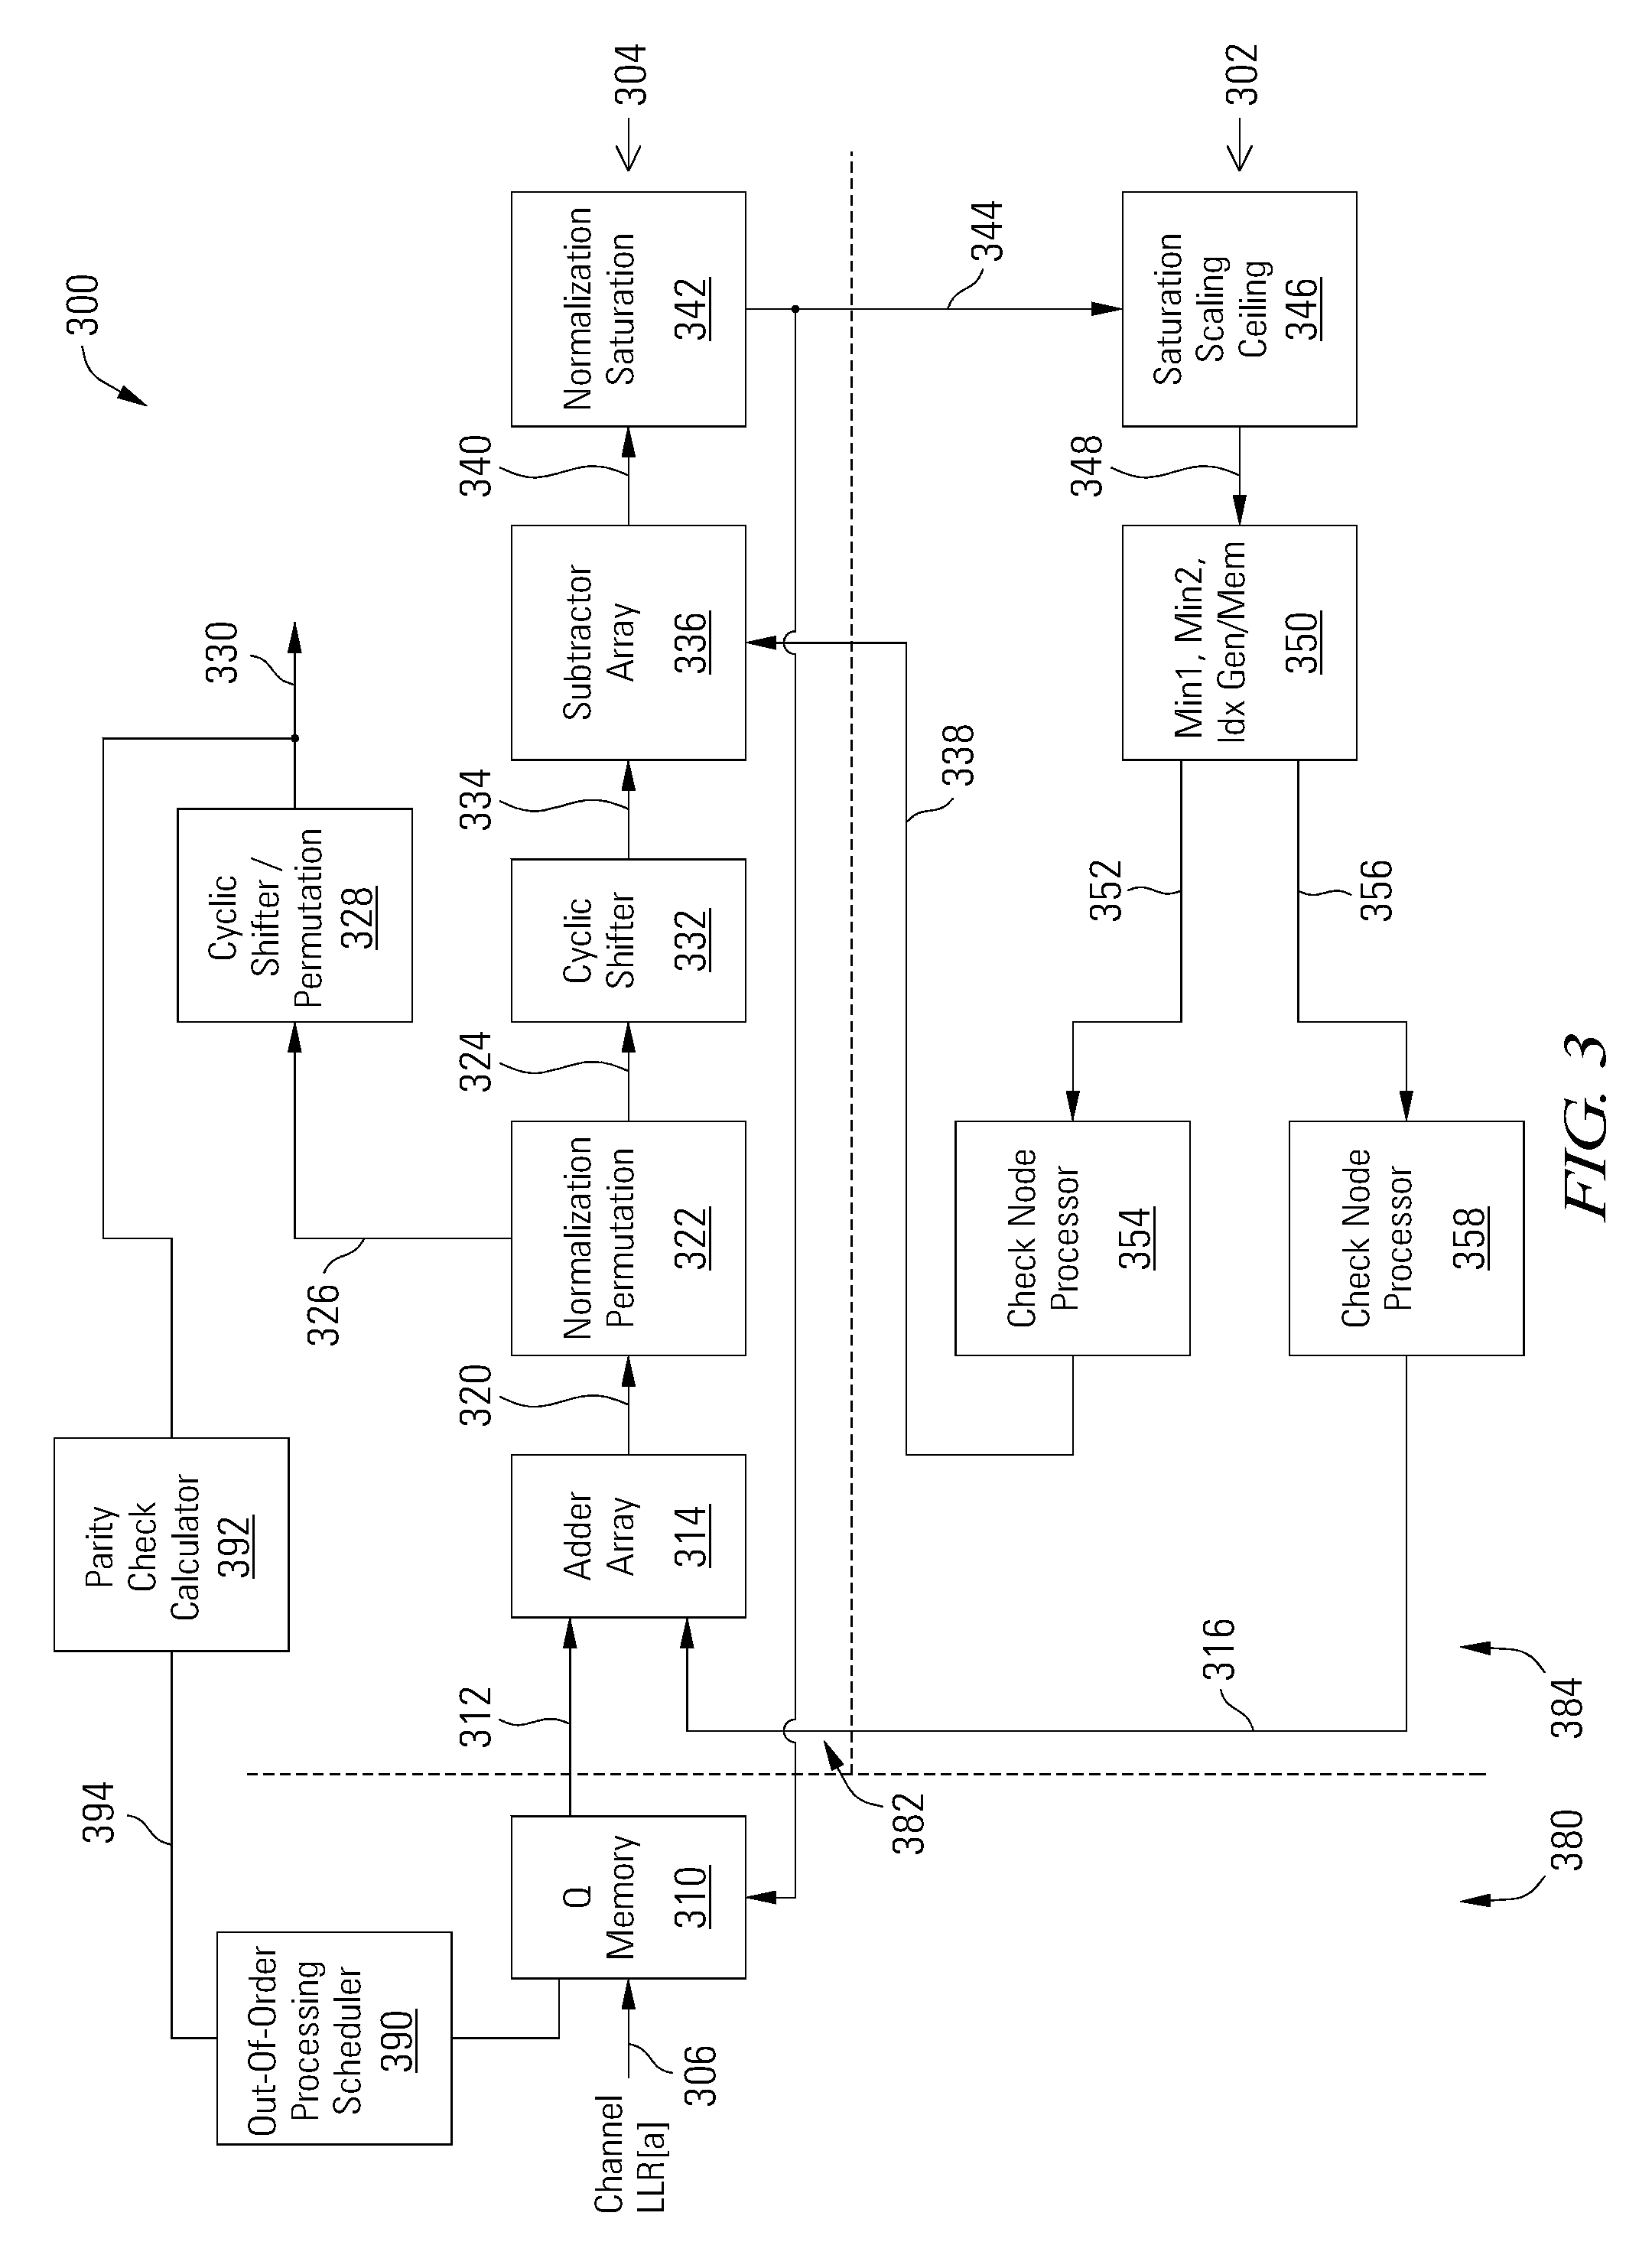 Multi-level LDPC layered decoder with out-of-order processing